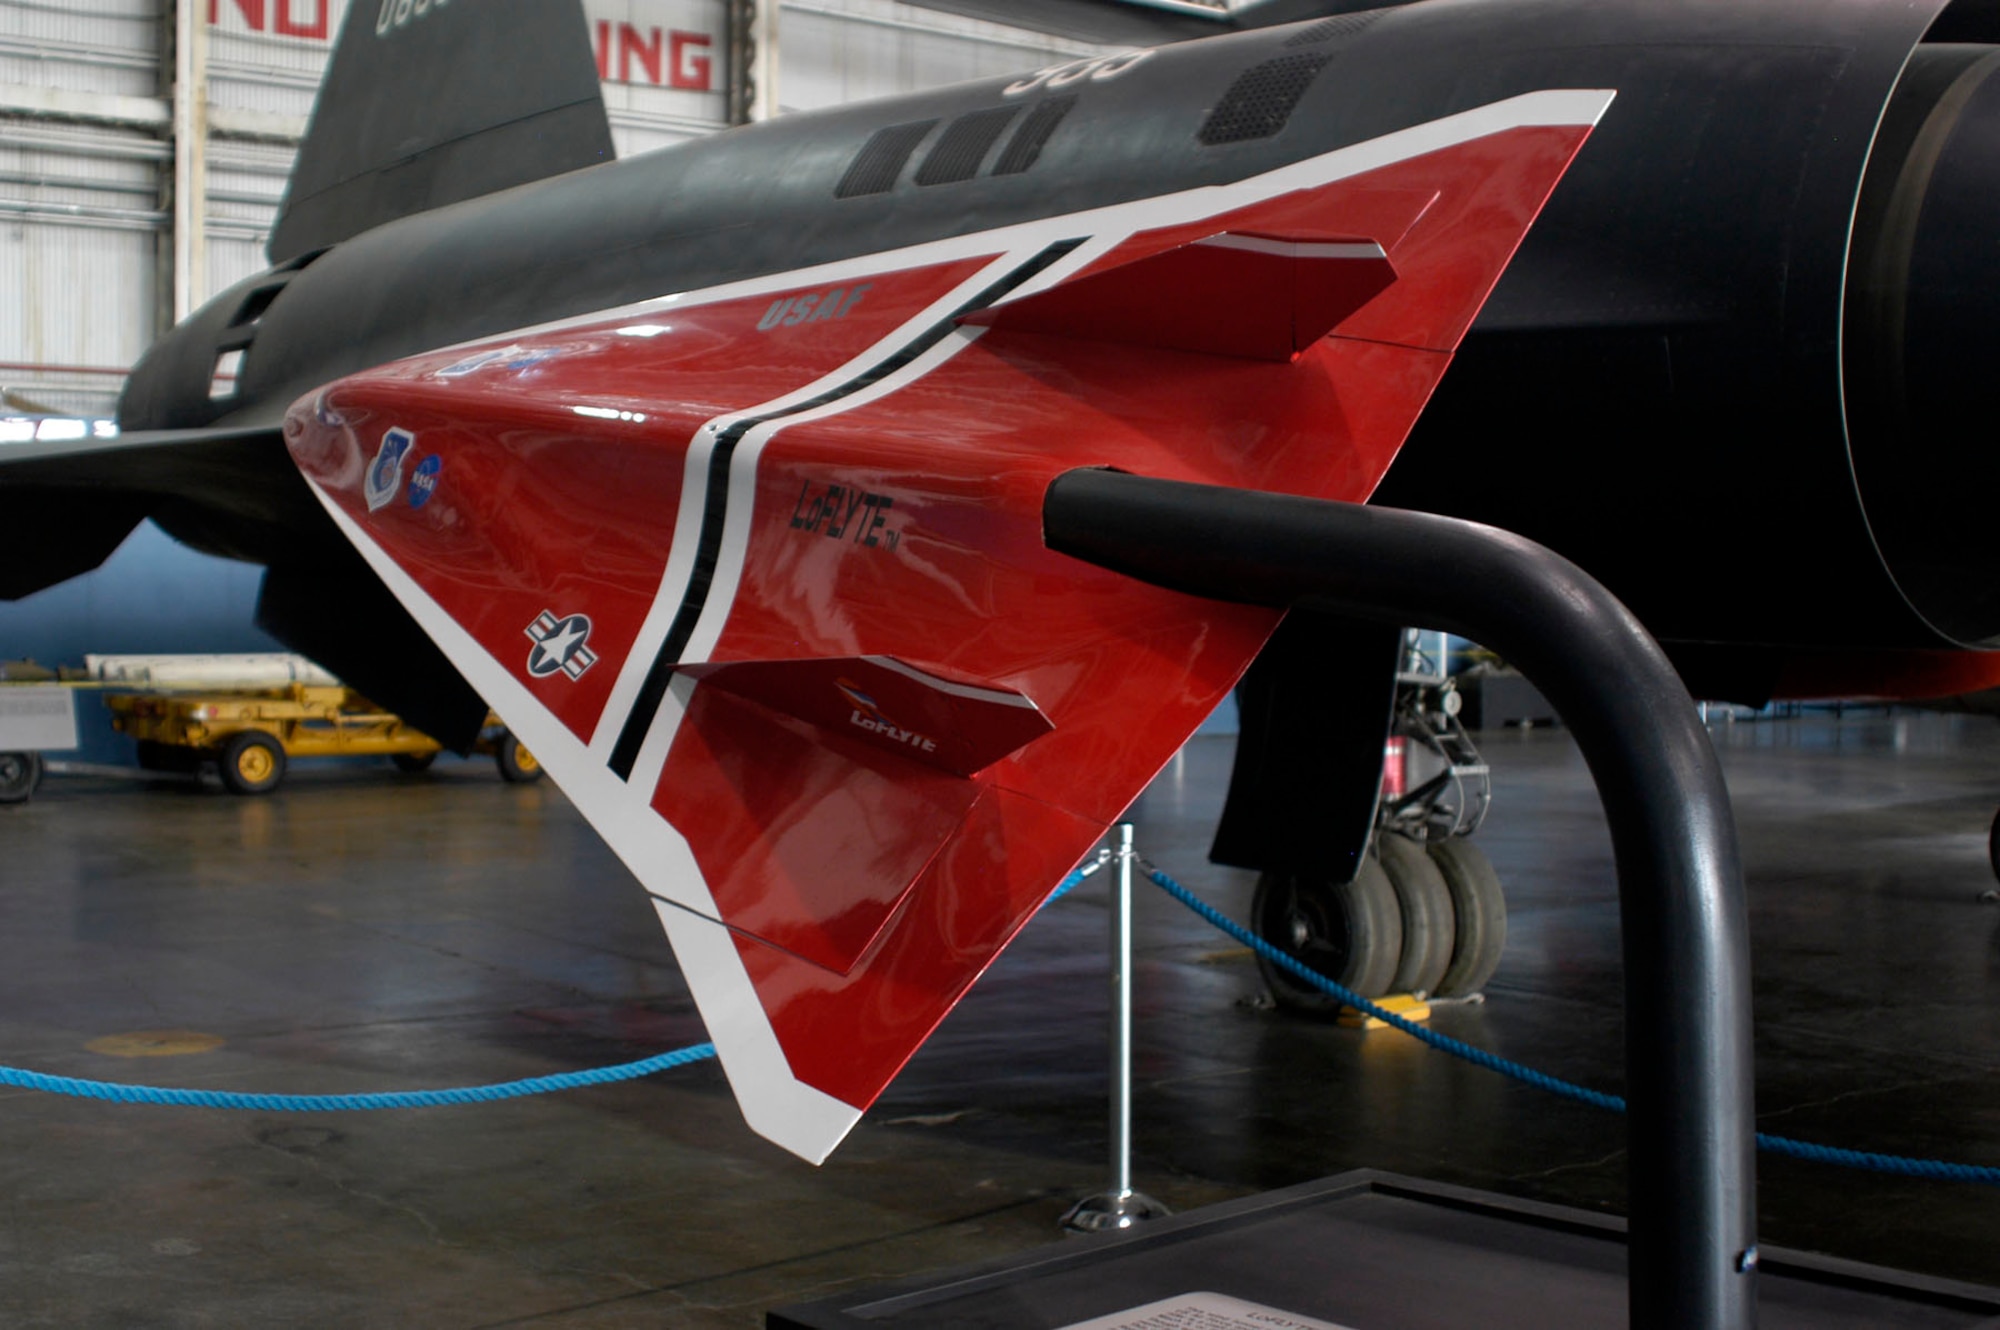 DAYTON, Ohio - The LoFLYTE Waverider Wind Tunnel Model on display in the Research & Development Gallery at the National Museum of the U.S. Air Force. (U.S. Air Force photo)